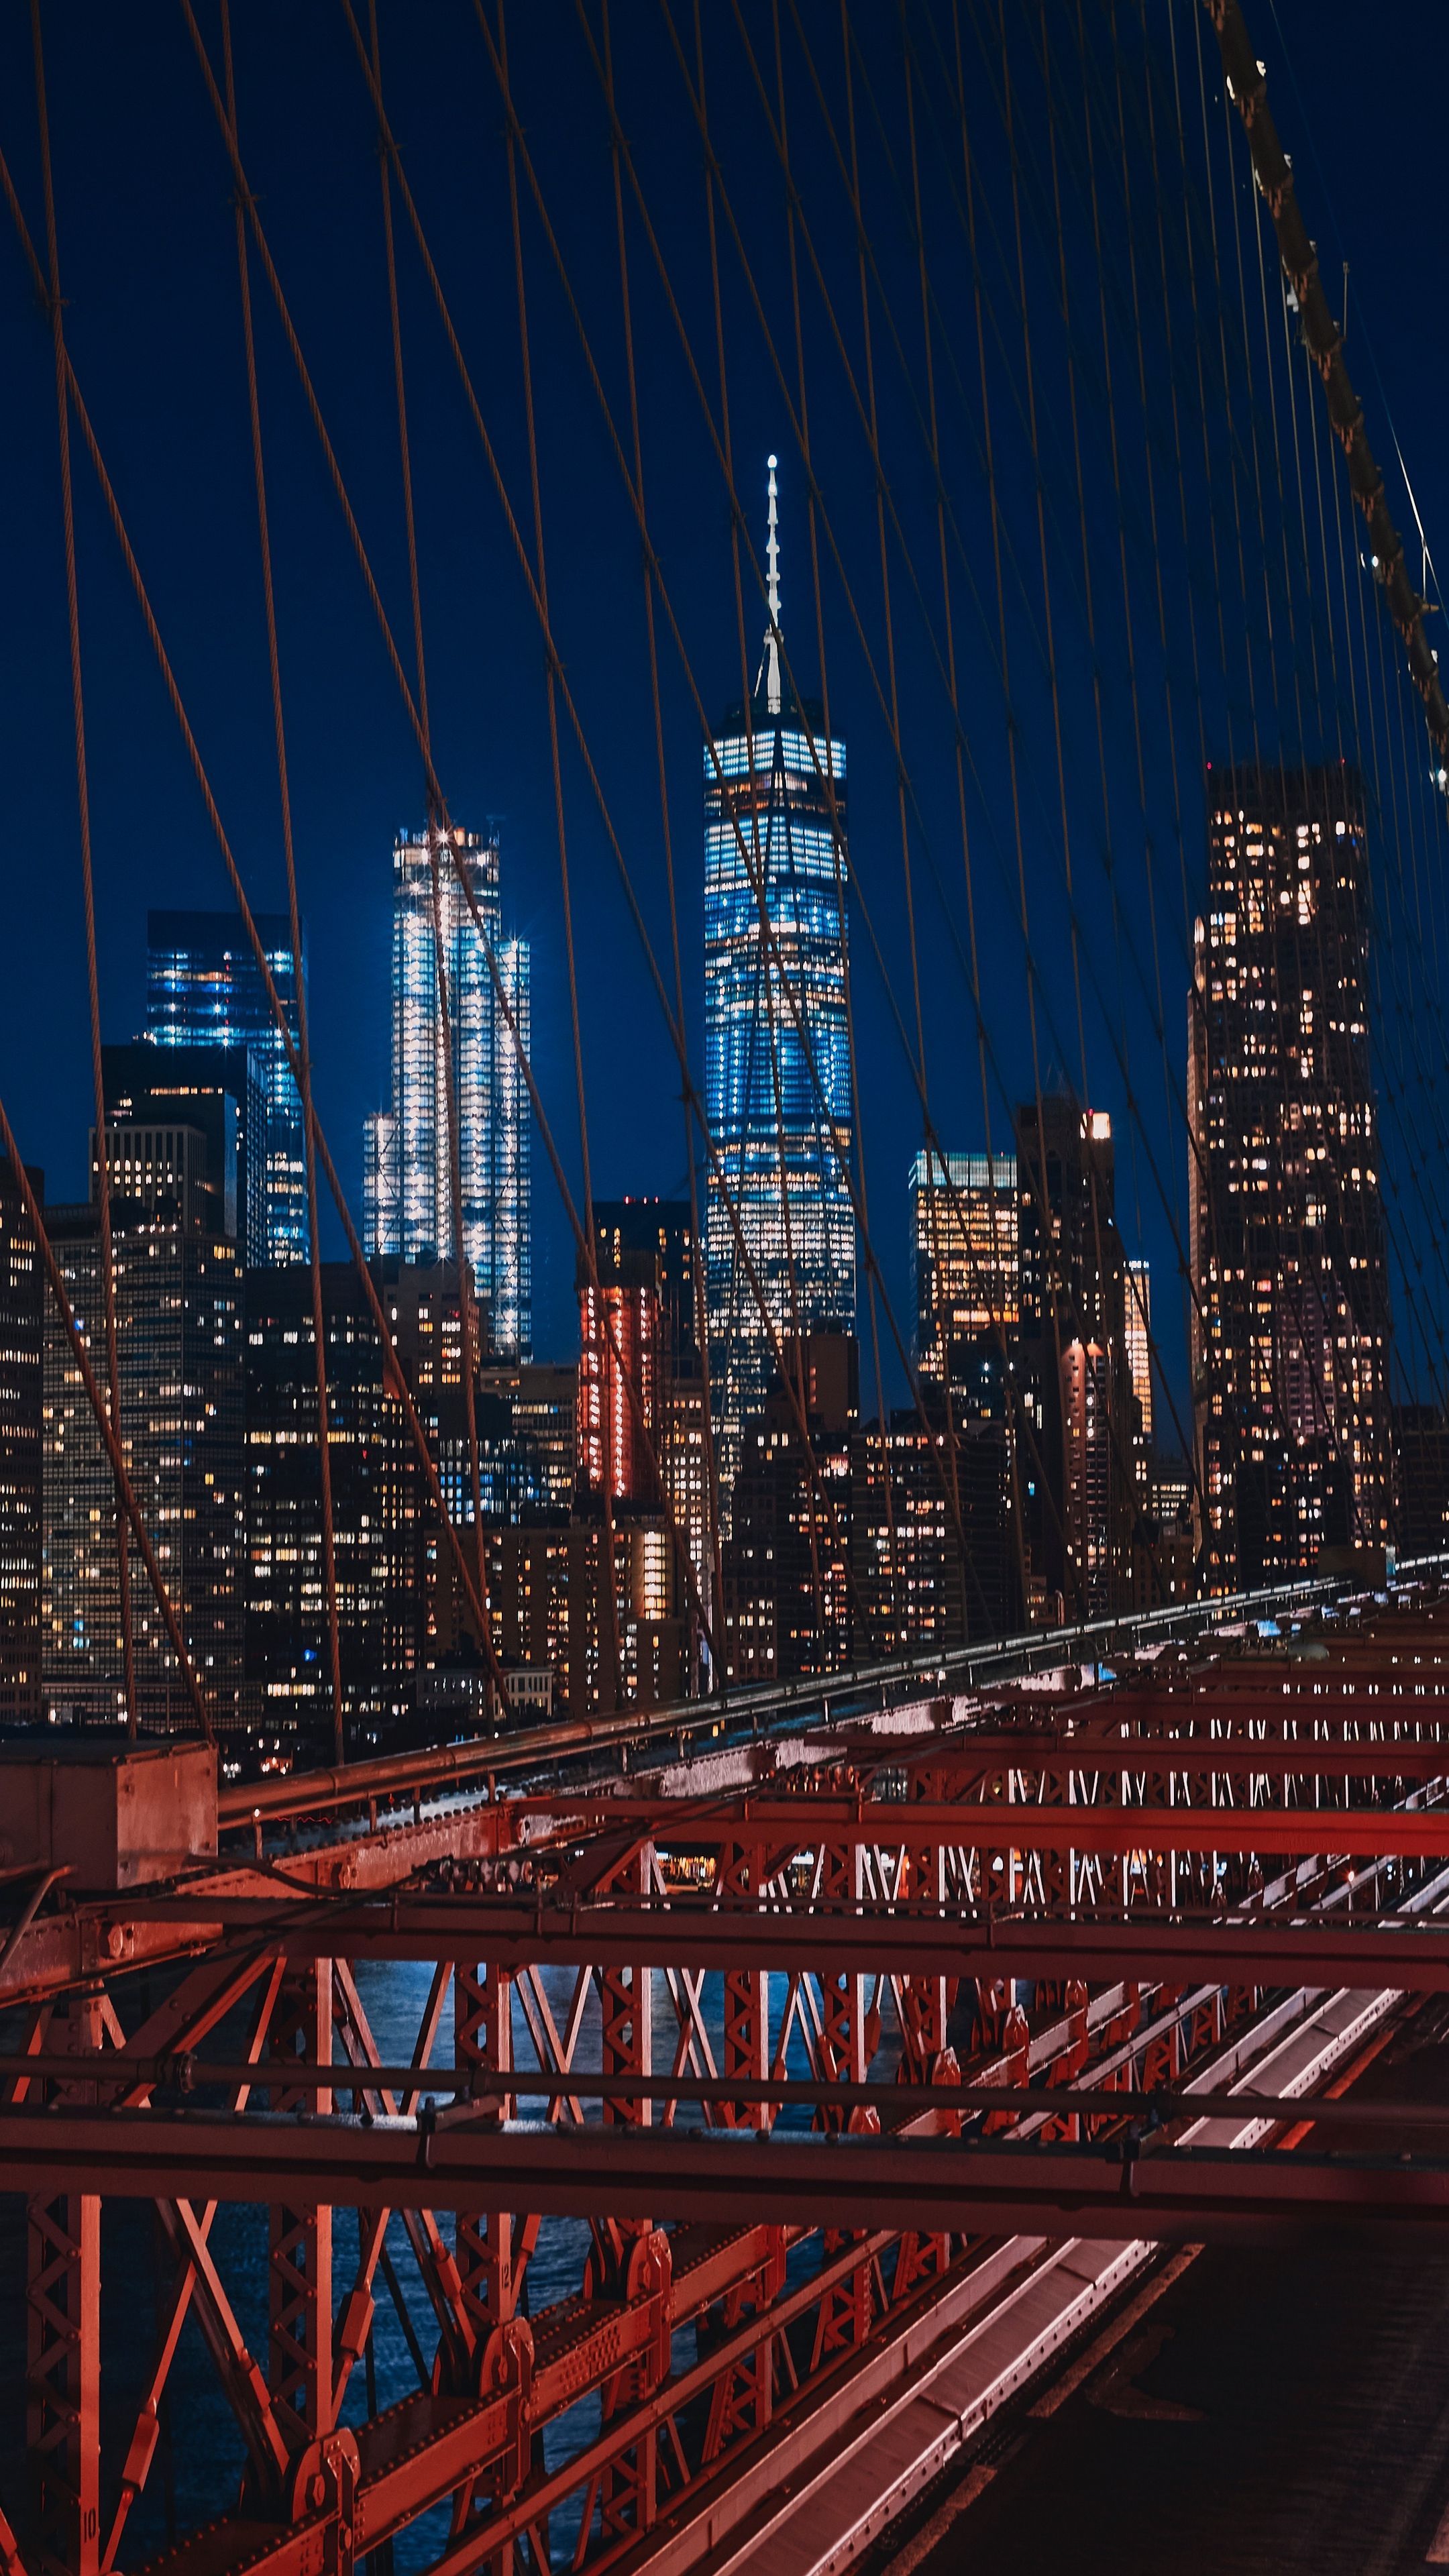 Places #newyork #brooklyn #bridge #usa #wallpaper HD 4k background for android :)